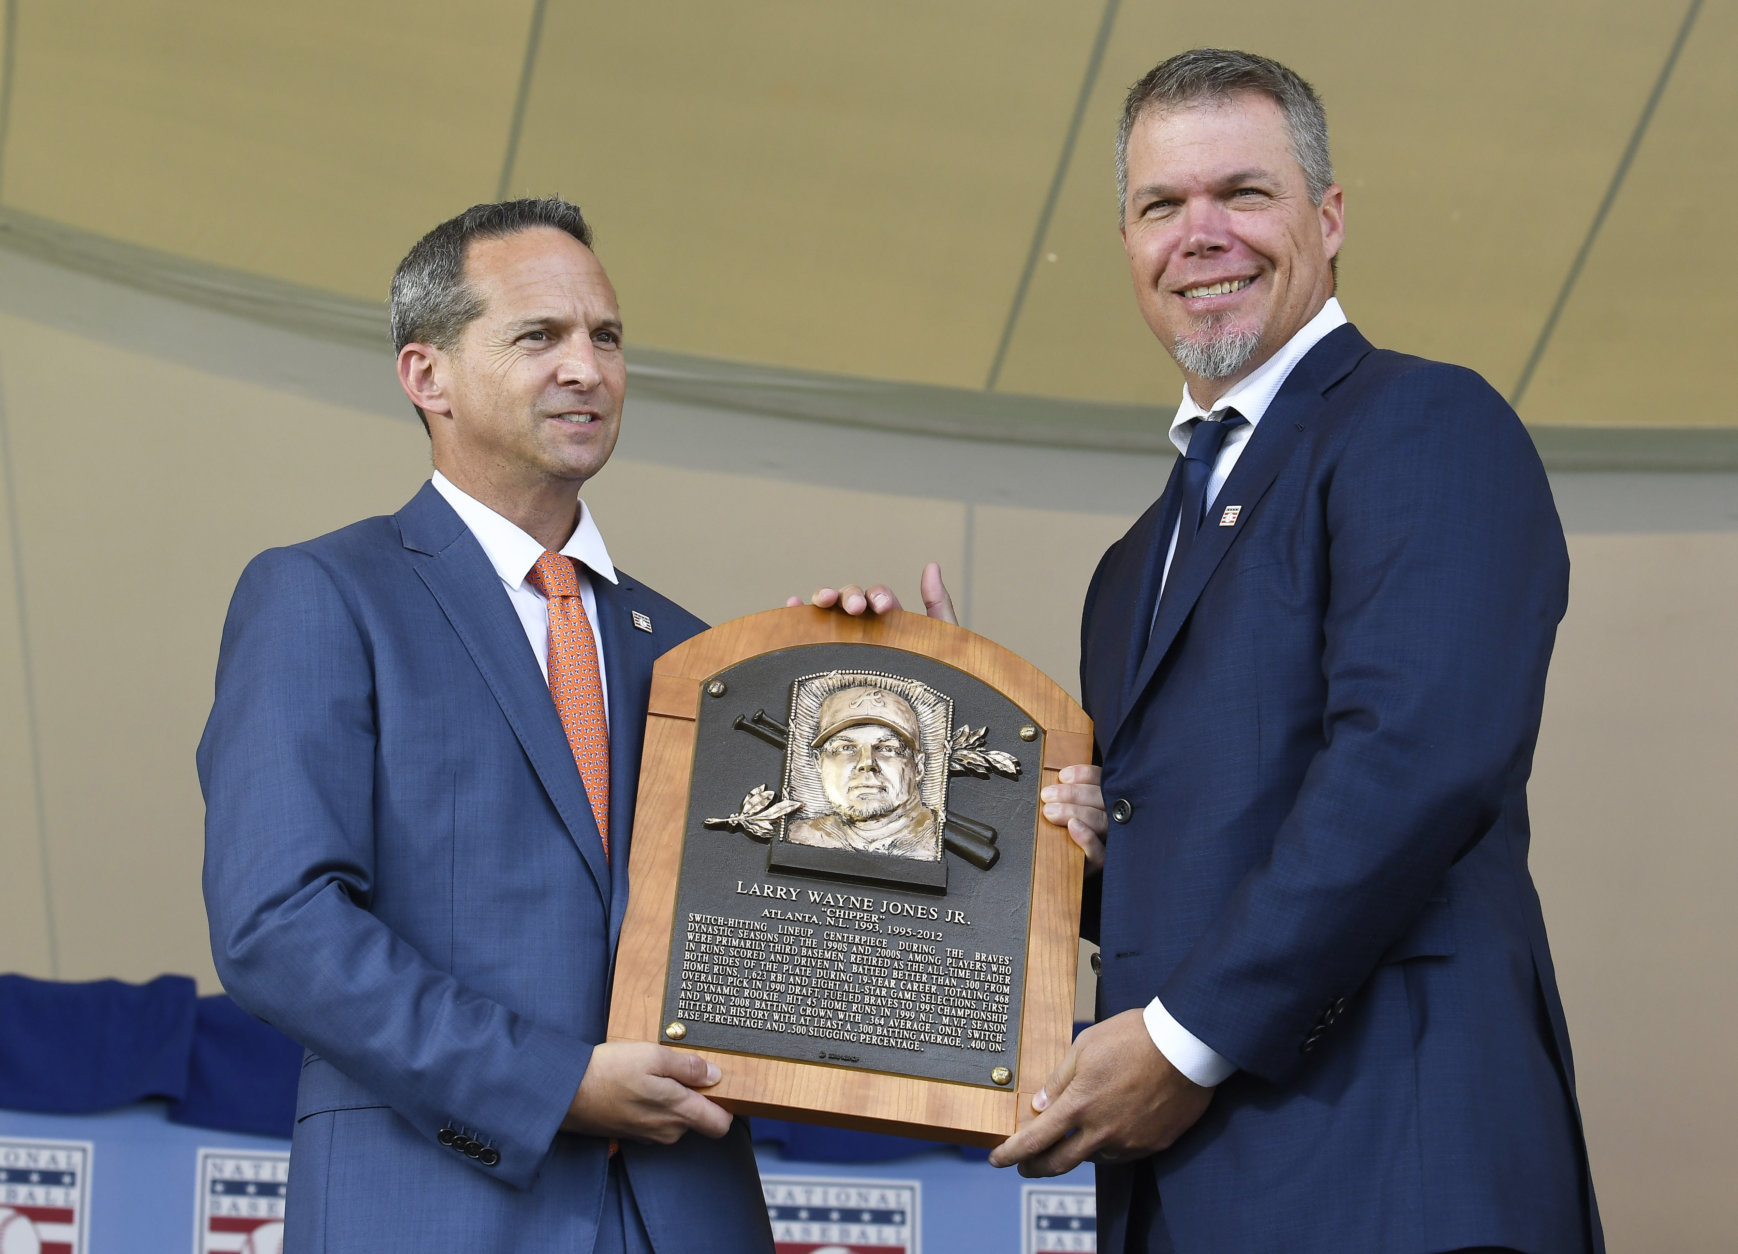 Open Thread: Trevor Hoffman Hall of Fame induction ceremony